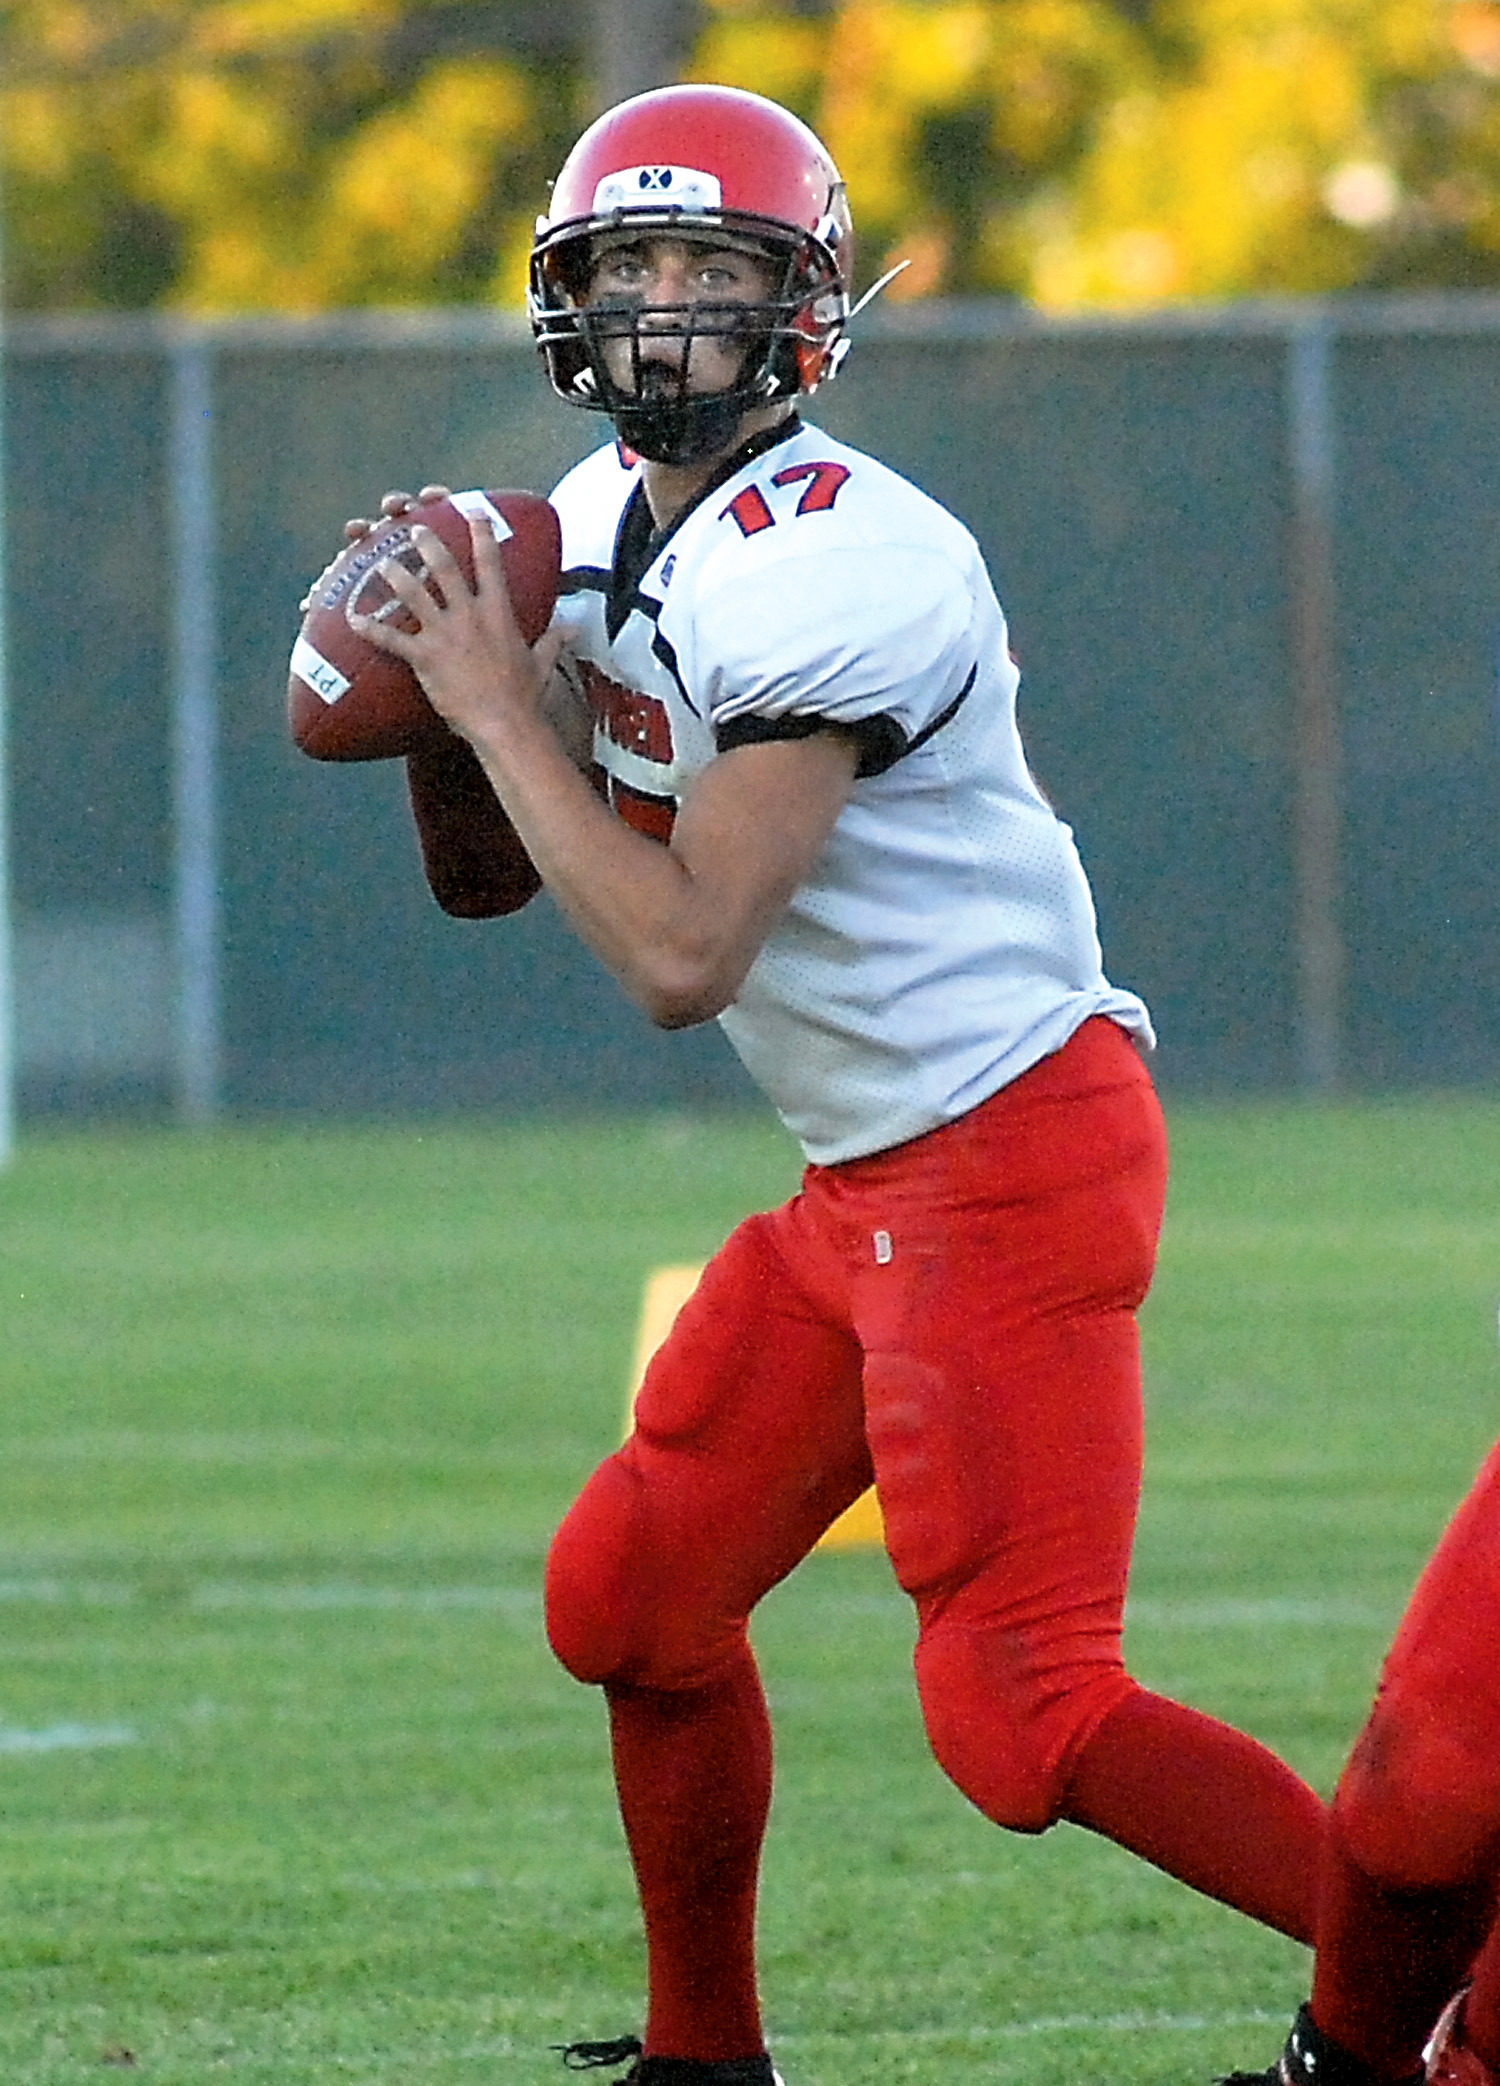 Port Townsend quarterback Jeff Seton looks to pass against Port Angeles earlier this month. Seton and the Redhawks face Olympic League 1A Division foe Klahowya tonight at Memorial Field. Keith Thorpe/Peninsula Daily News